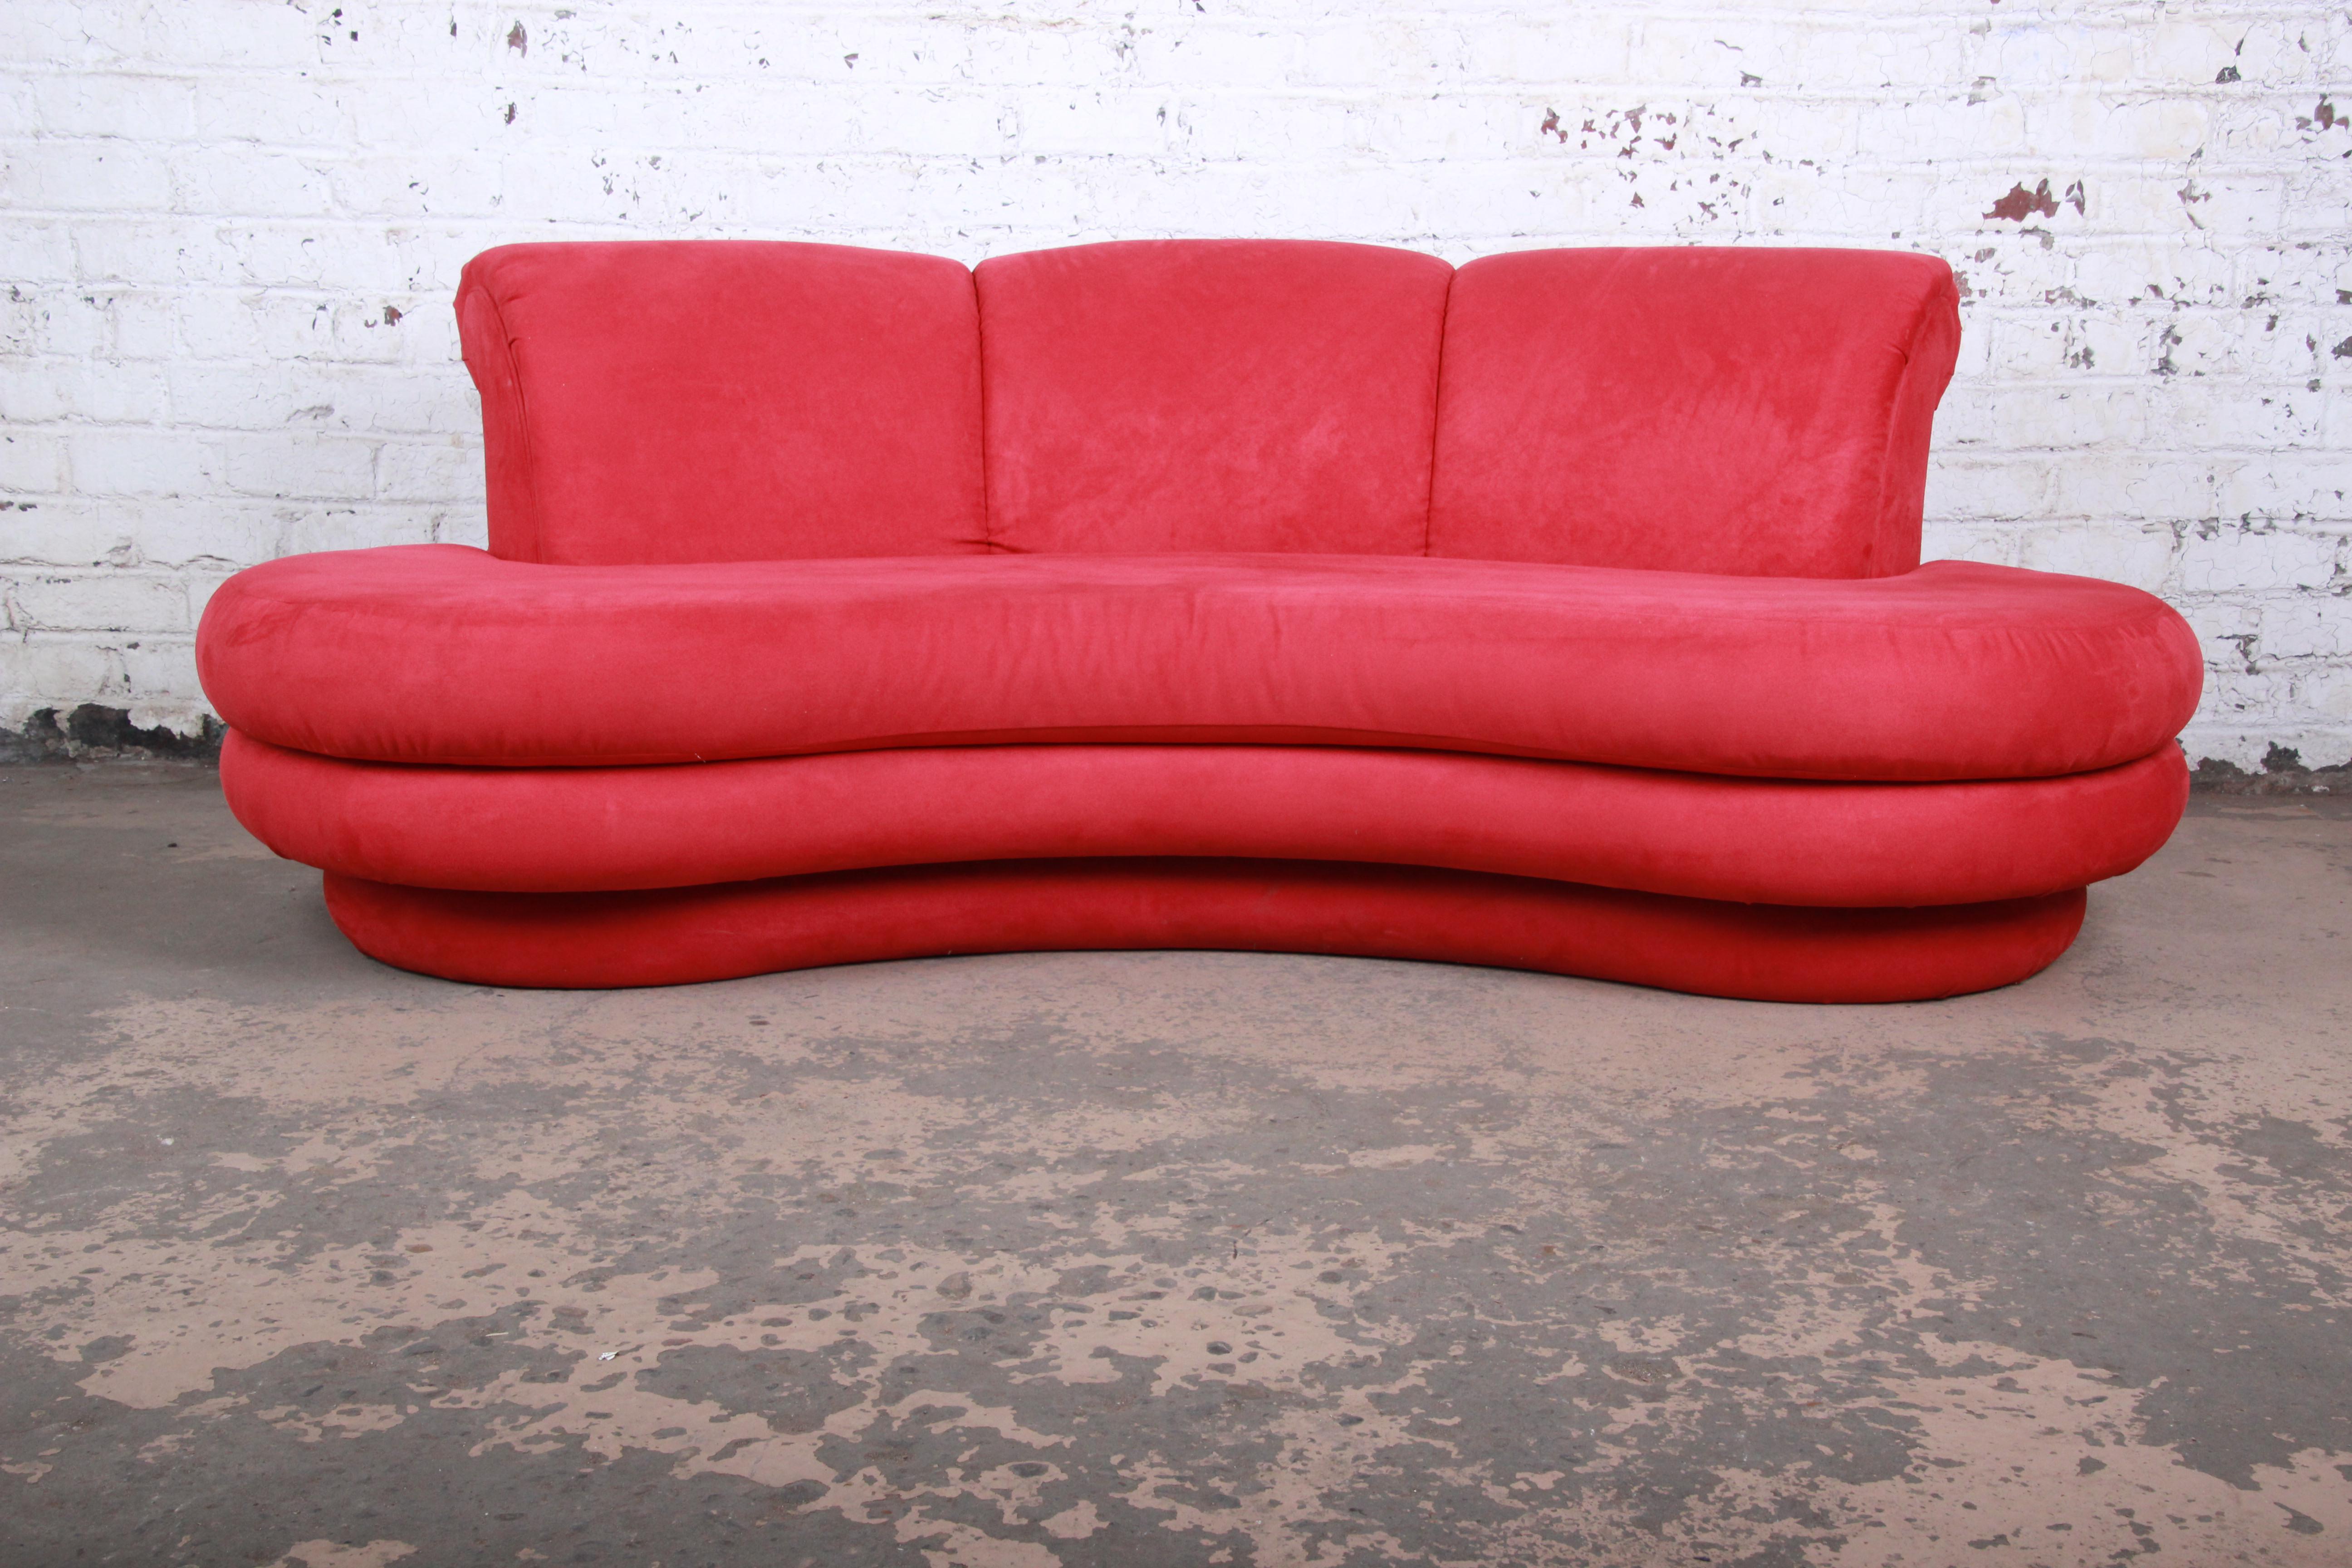 A gorgeous curved cloud sofa designed by Adrian Pearsall for Comfort Designs. The sofa features vibrant red upholstery and a unique organic three-tiered sculptural design. Very reminiscent in style to similar sofas designed by Milo Baughman or